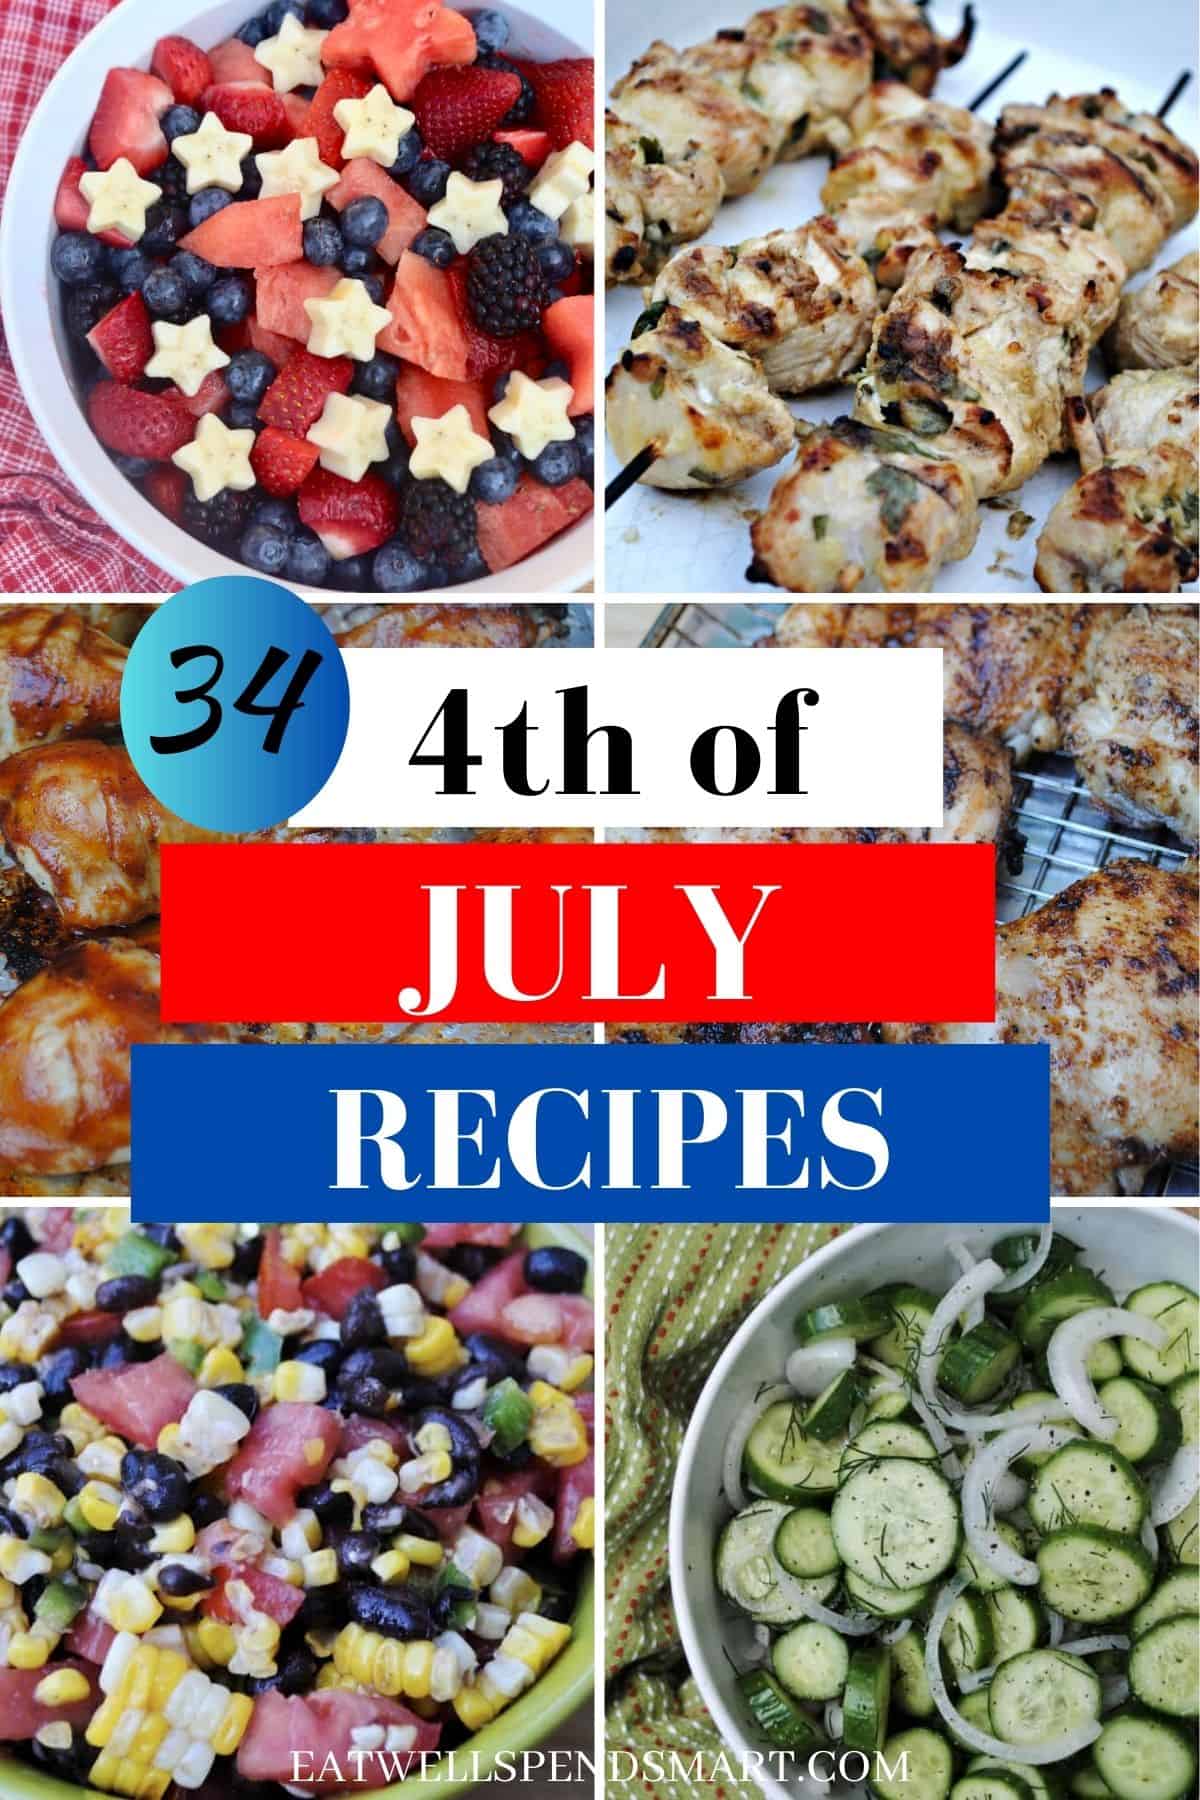 Festive 4th of July food ideas for a perfect cookout - Eat Well Spend Smart